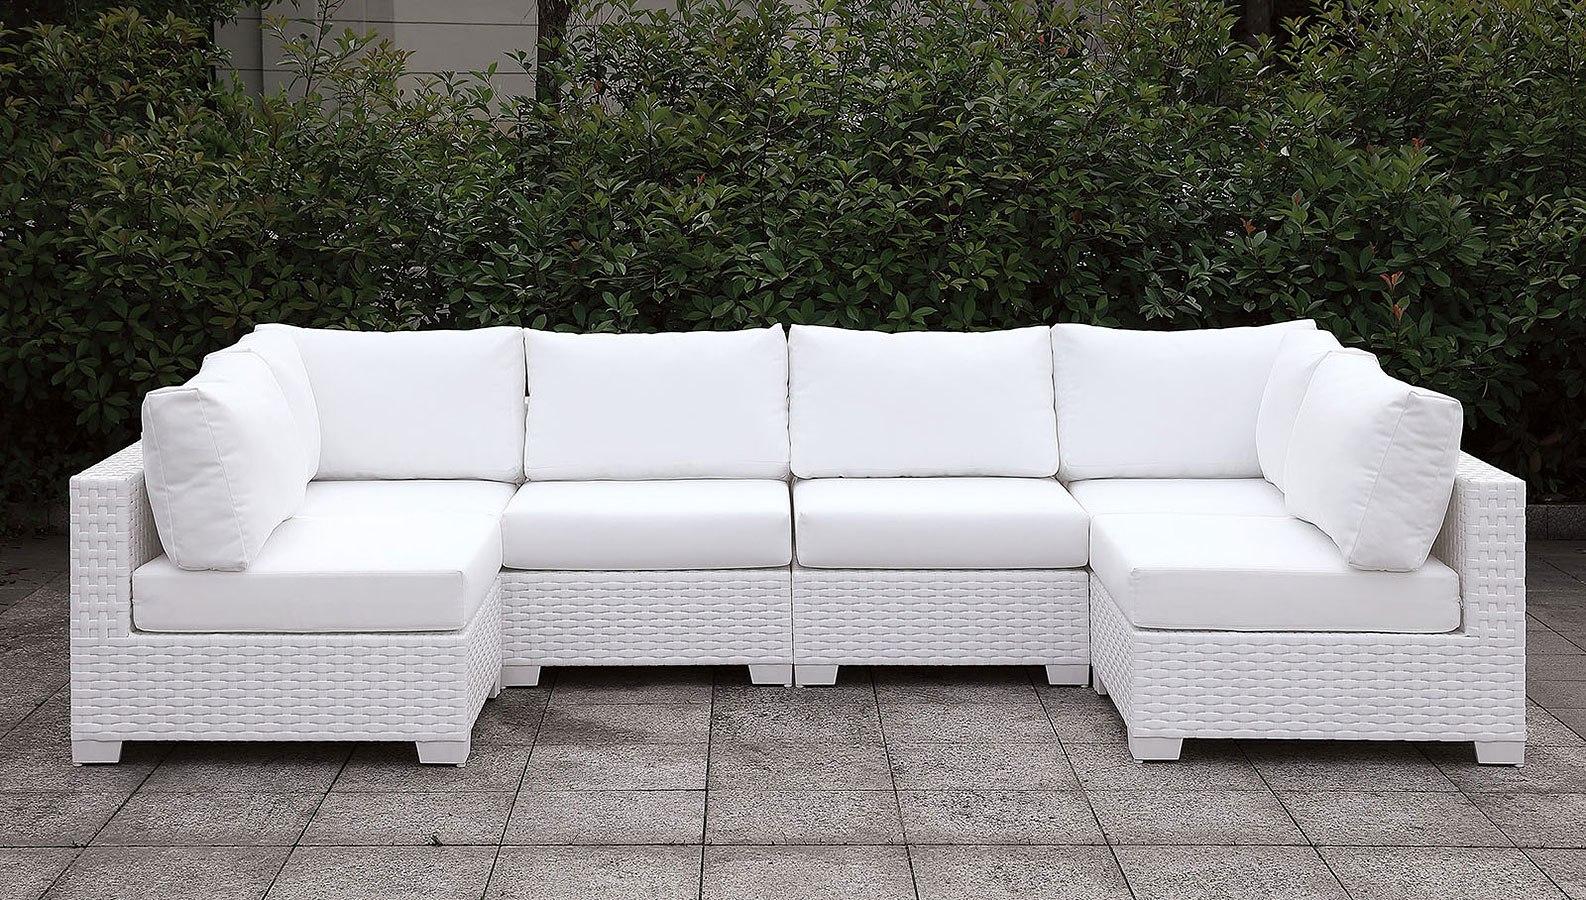 Contemporary Outdoor Sectional Set CM-OS2128WH-SET6 Somani CM-OS2128WH-SET6 in White Wicker